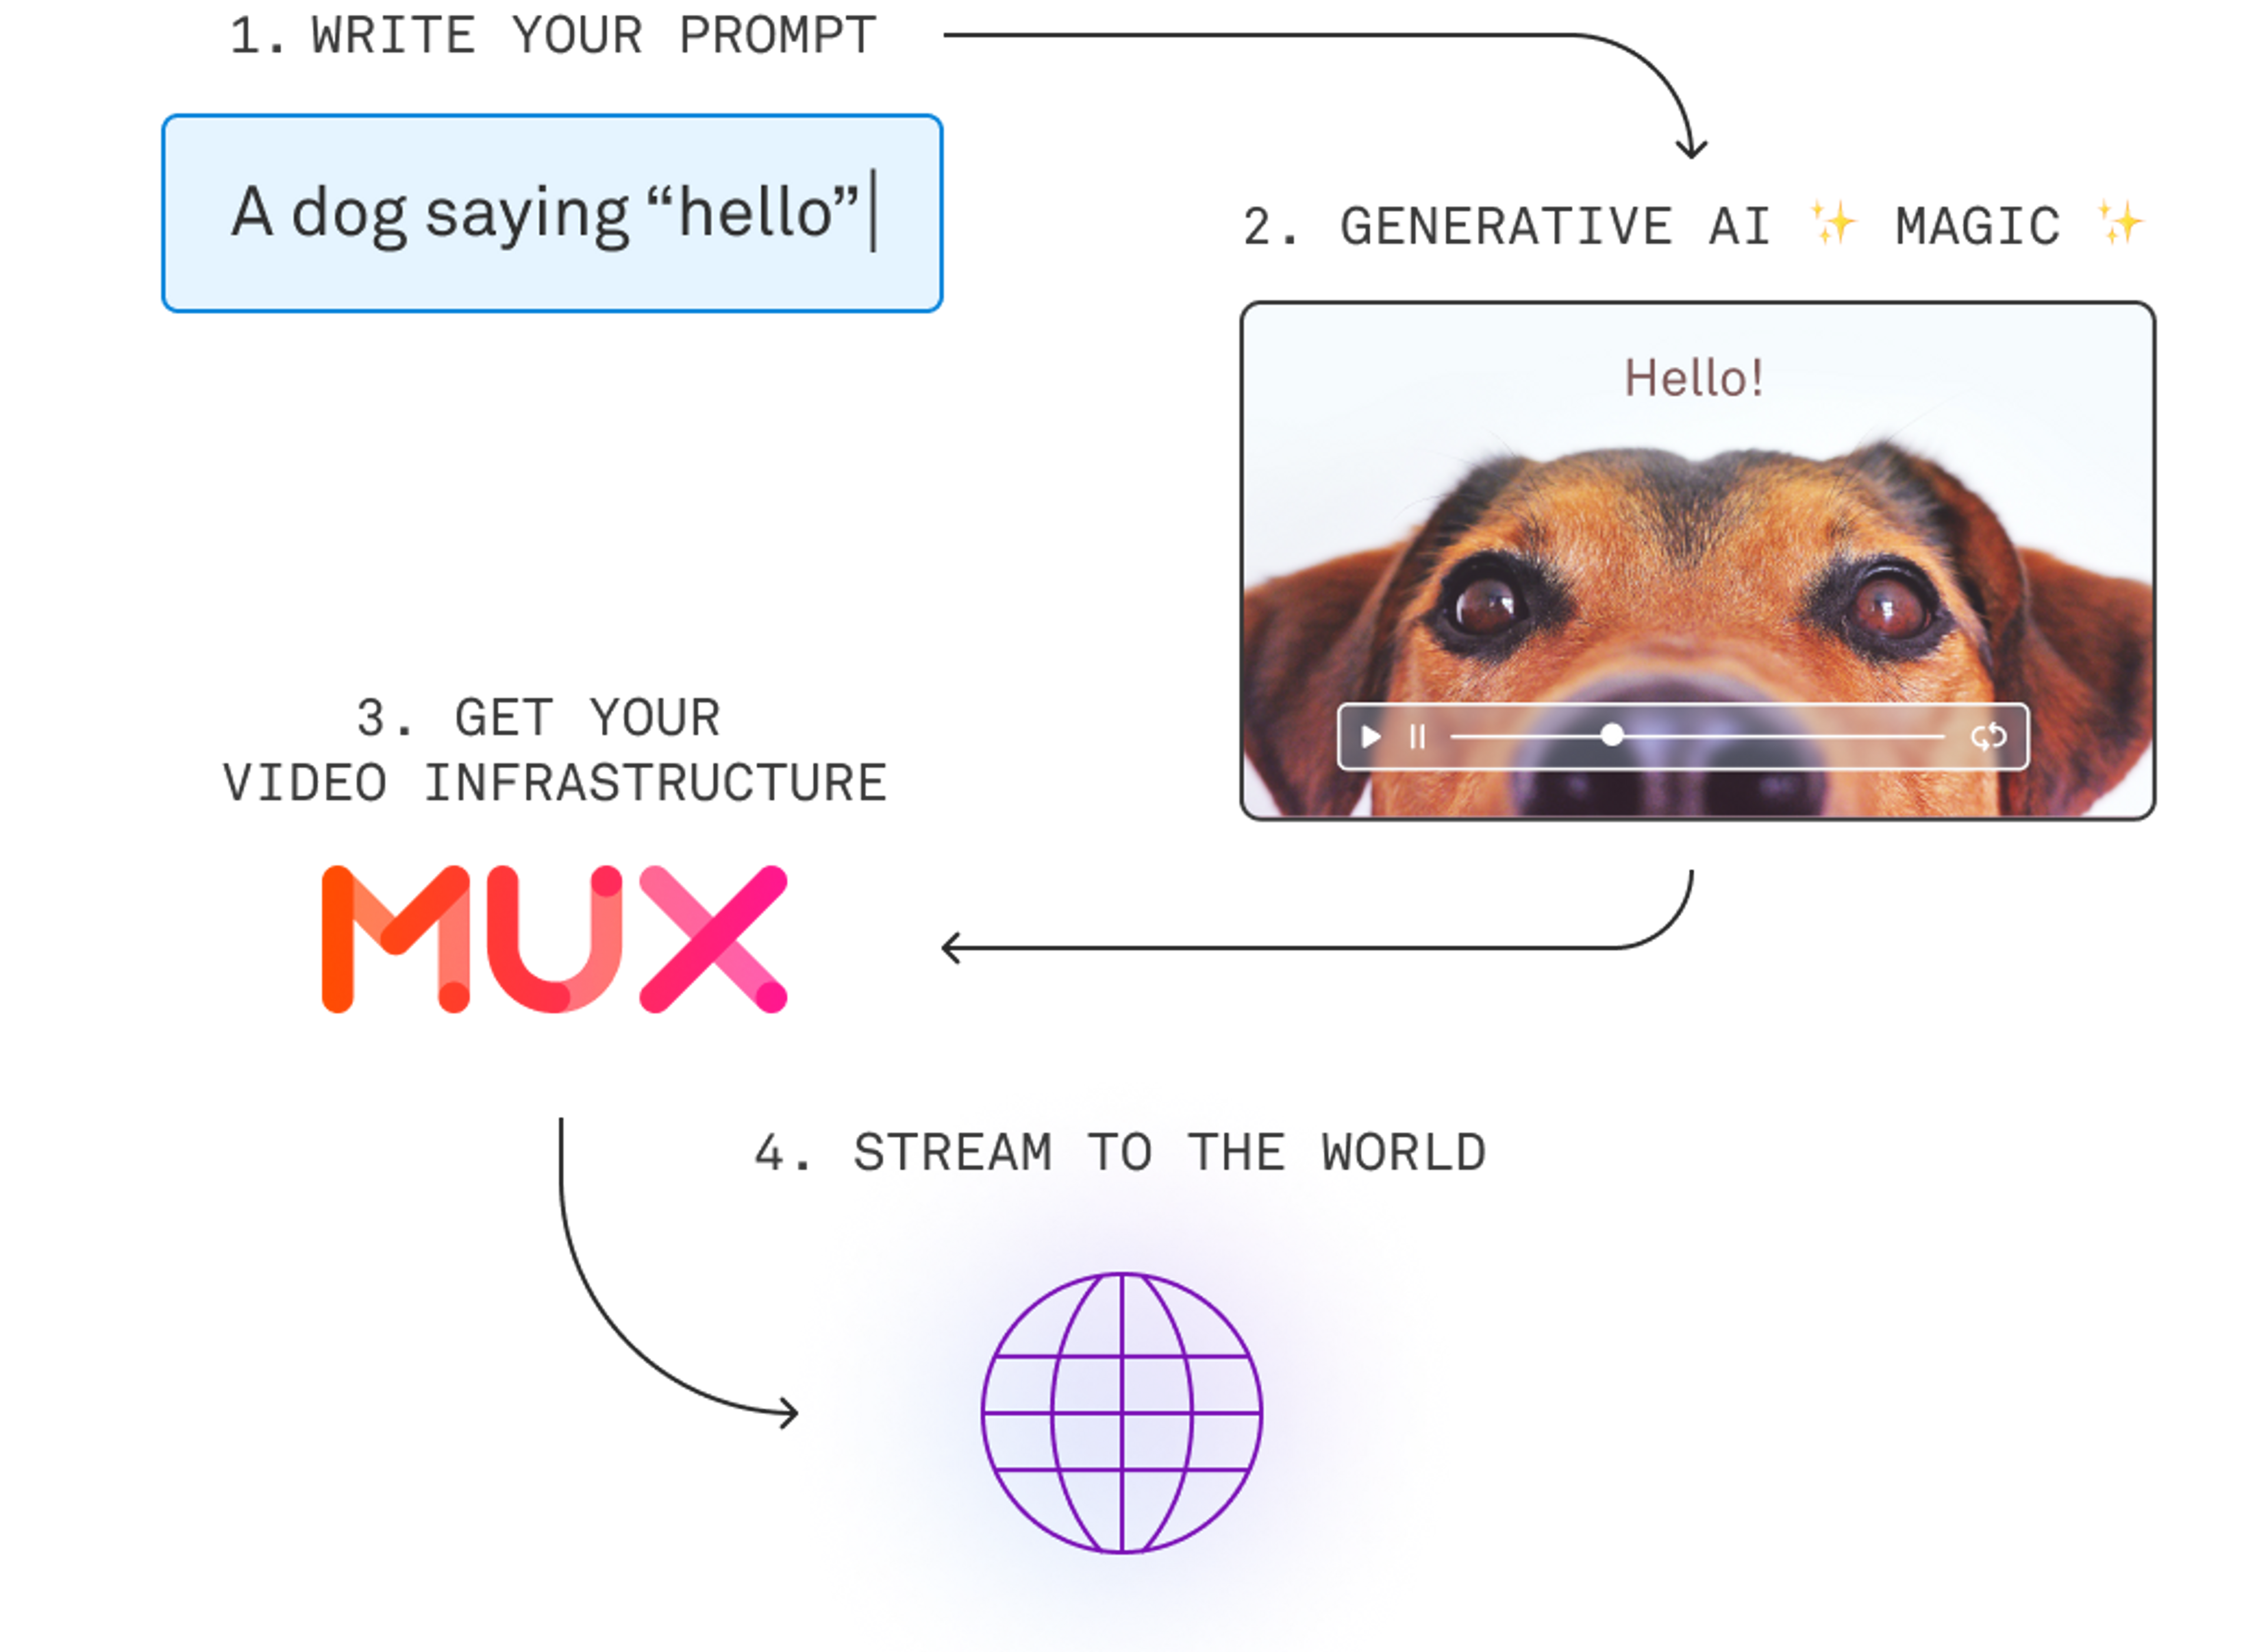 Mux for generative AI video applications